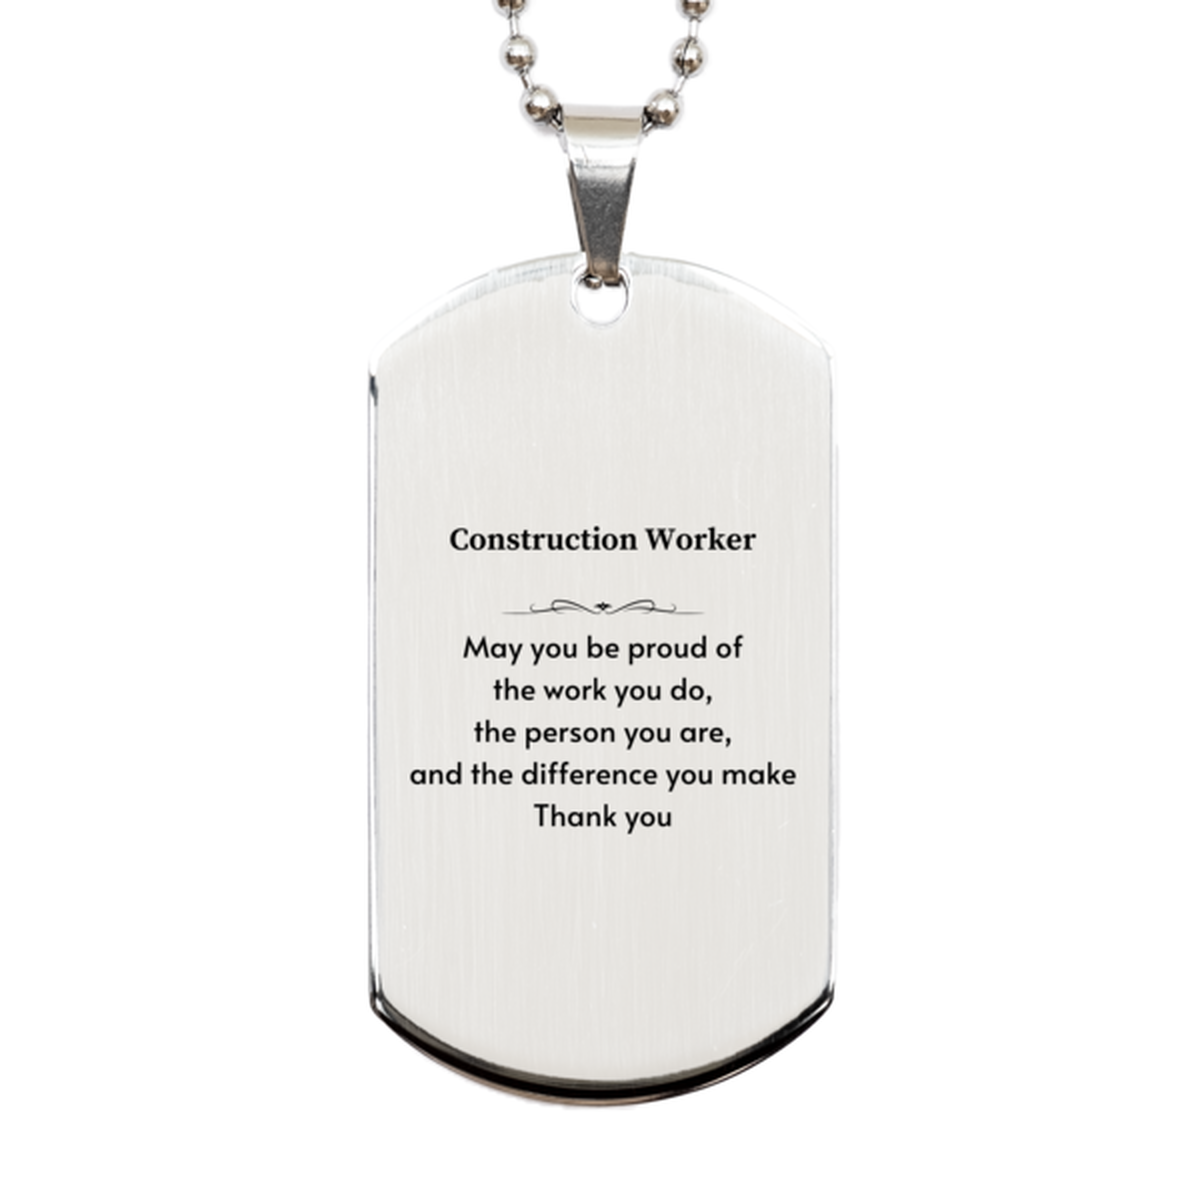 Heartwarming Silver Dog Tag Retirement Coworkers Gifts for Construction Worker, Construction Worker May You be proud of the work you do, the person you are Gifts for Boss Men Women Friends